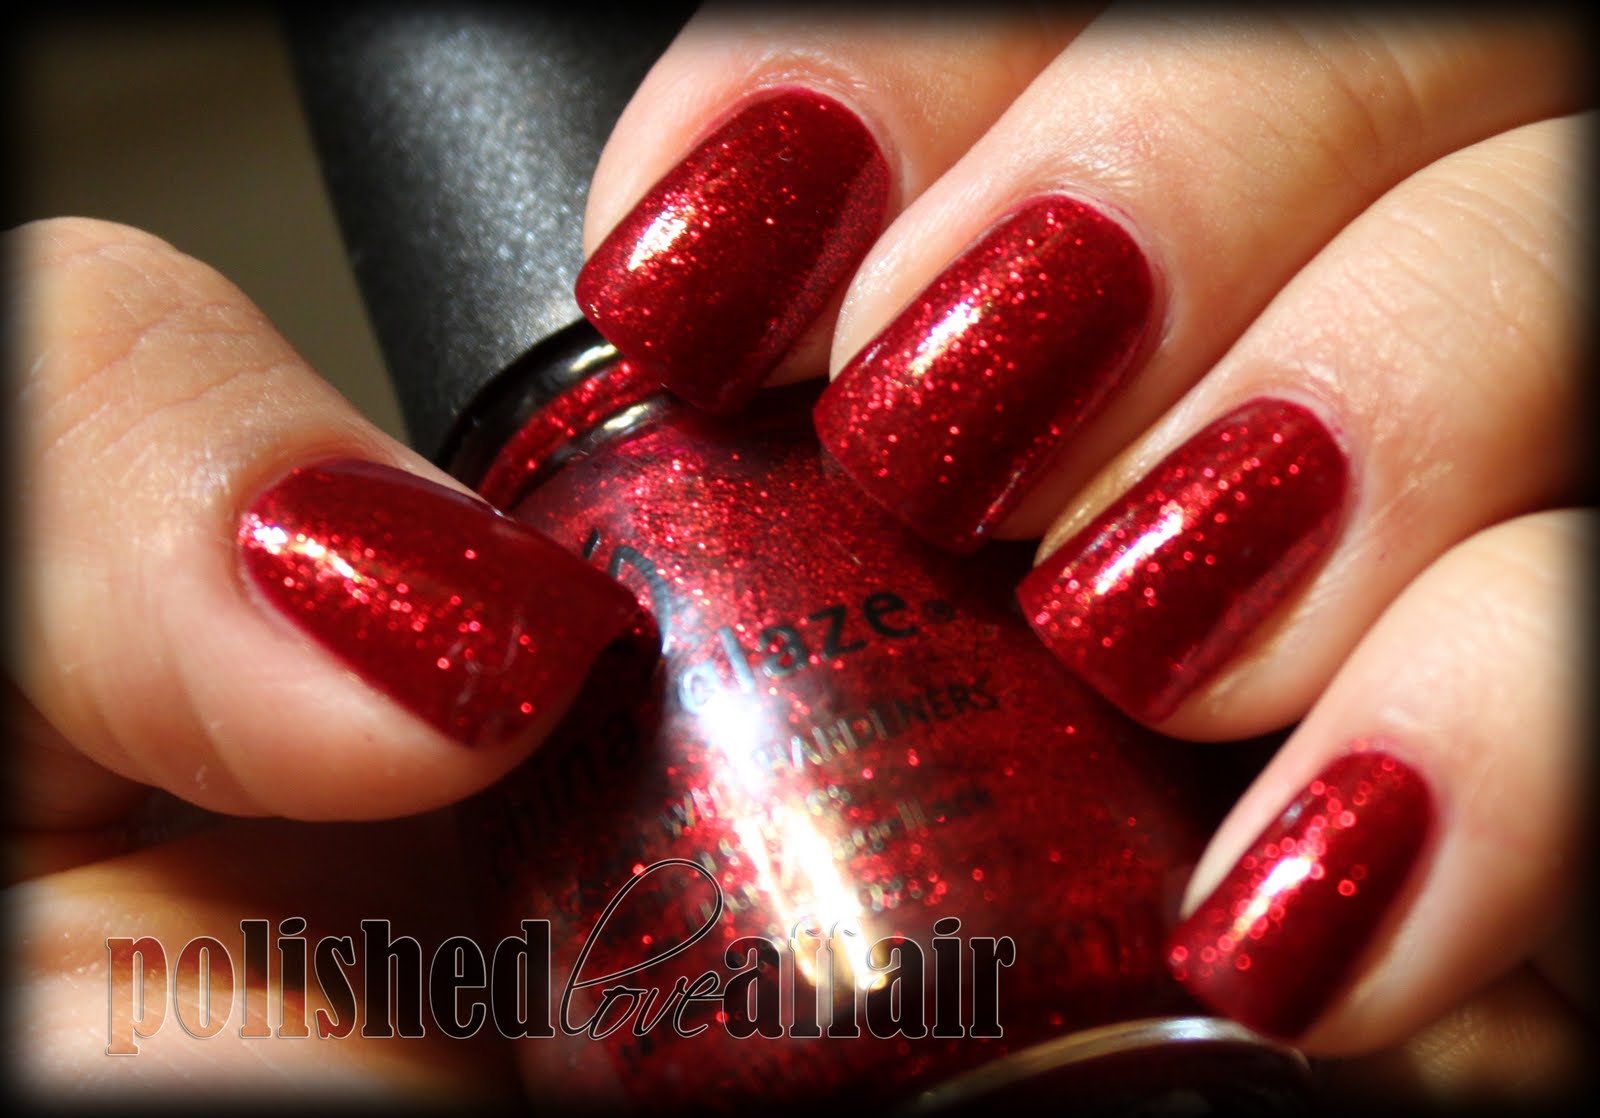 4. China Glaze Nail Lacquer in "Ruby Pumps" - wide 1